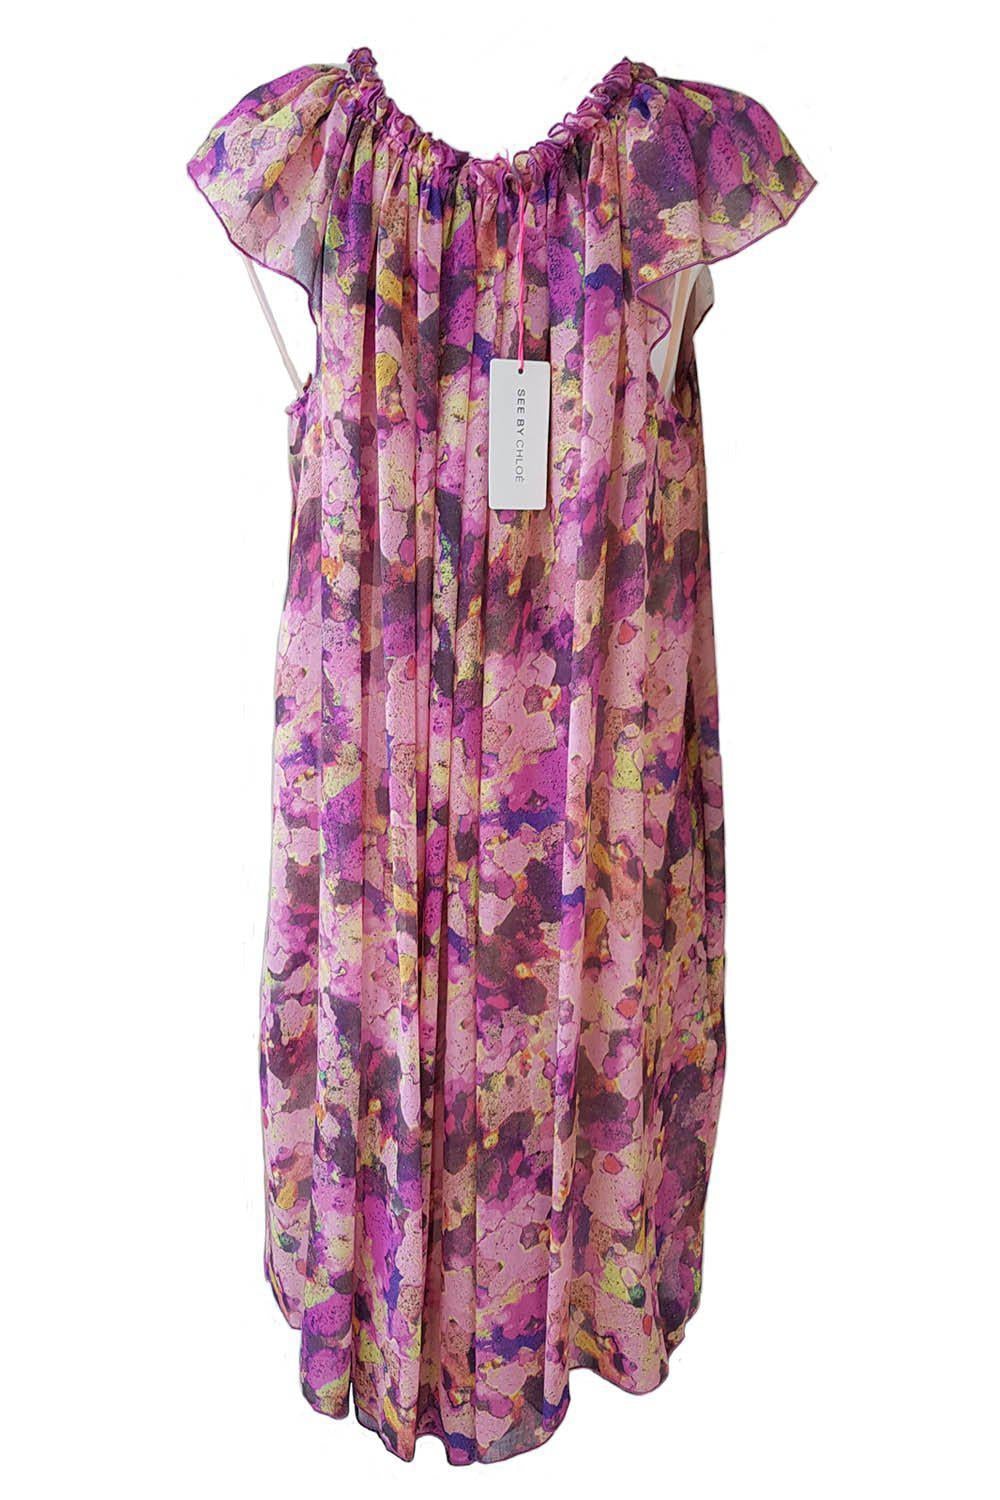 SEE BY CHLOÉ Silk Mix Chiffon Dress UK 12-See By Chloe-The Freperie